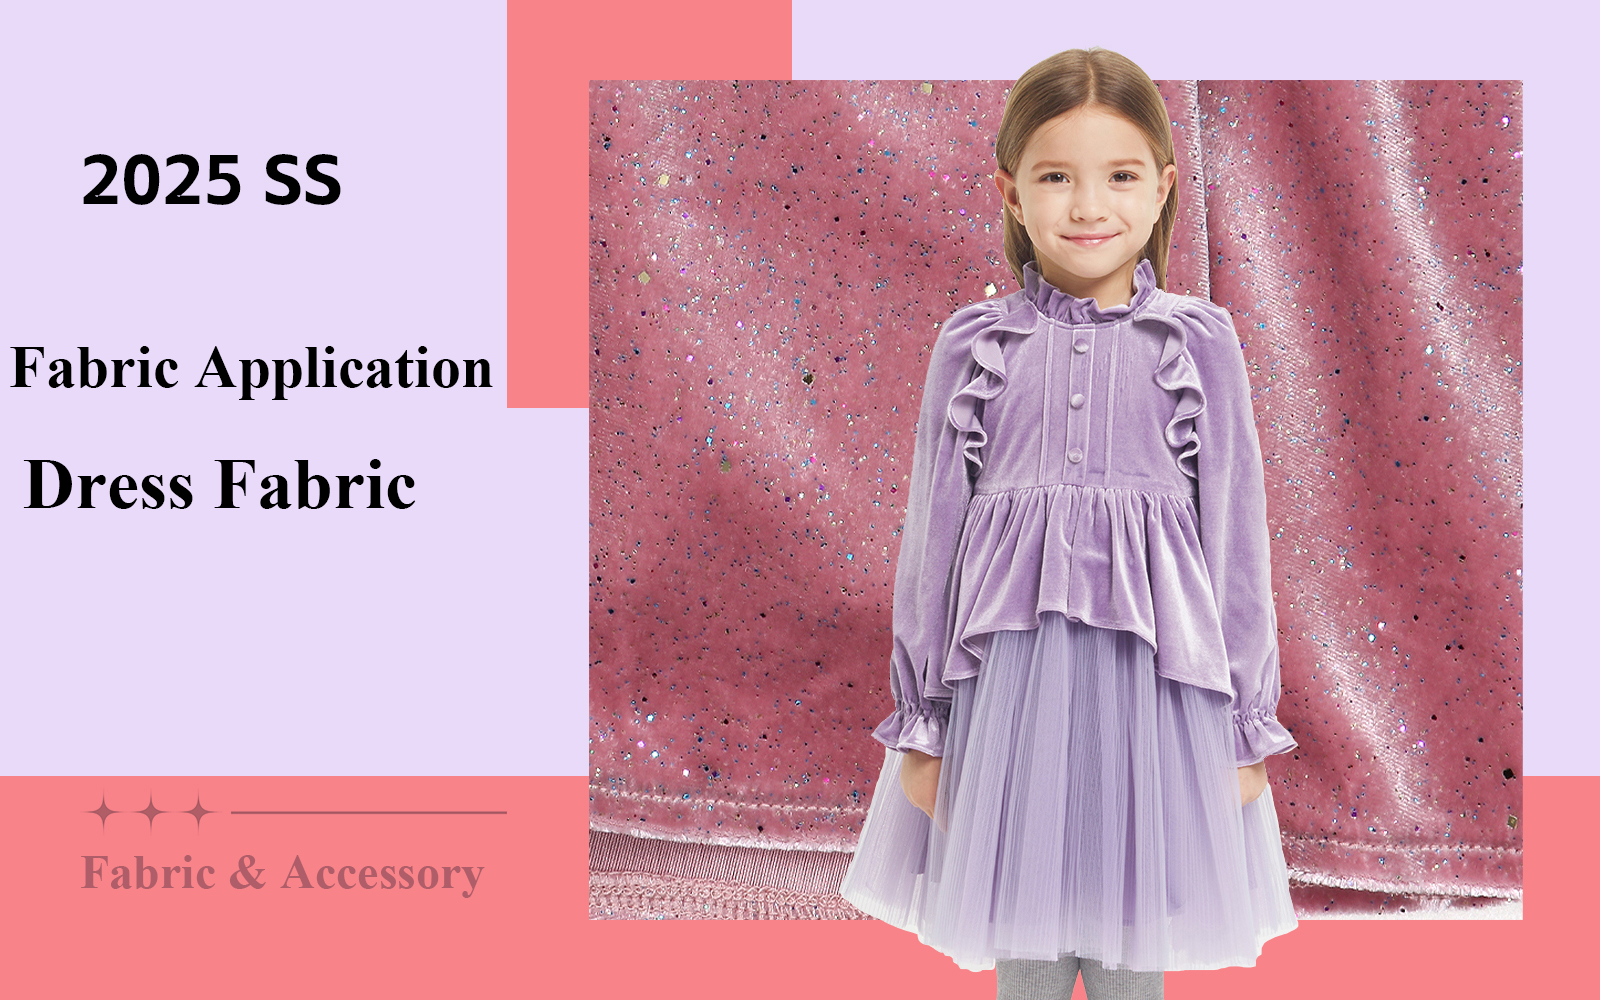 The Fabric Trend for Girls' Dress